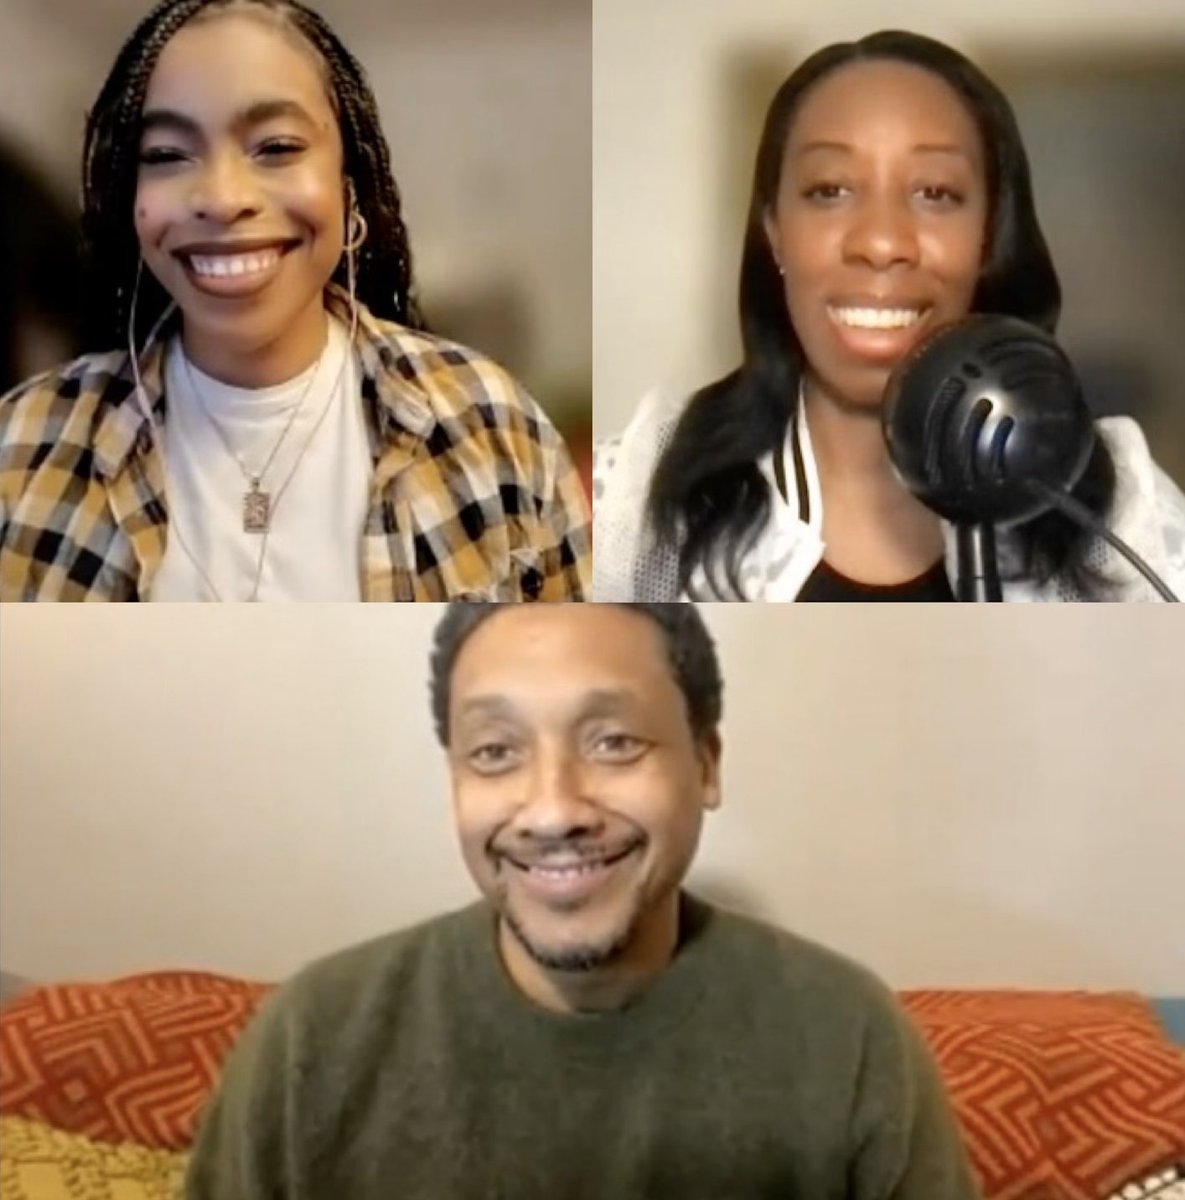 Oh, Hell Yes! Our interview with Khalil Kain aka Darnell Wilkes,  drops on Wednesday! 🙌 🙌 

#Girlfriendsonnetflix #blacksitcoms #Darnellwilkes #Mayawilkes #applepodcasts #spotifyforpodcasters